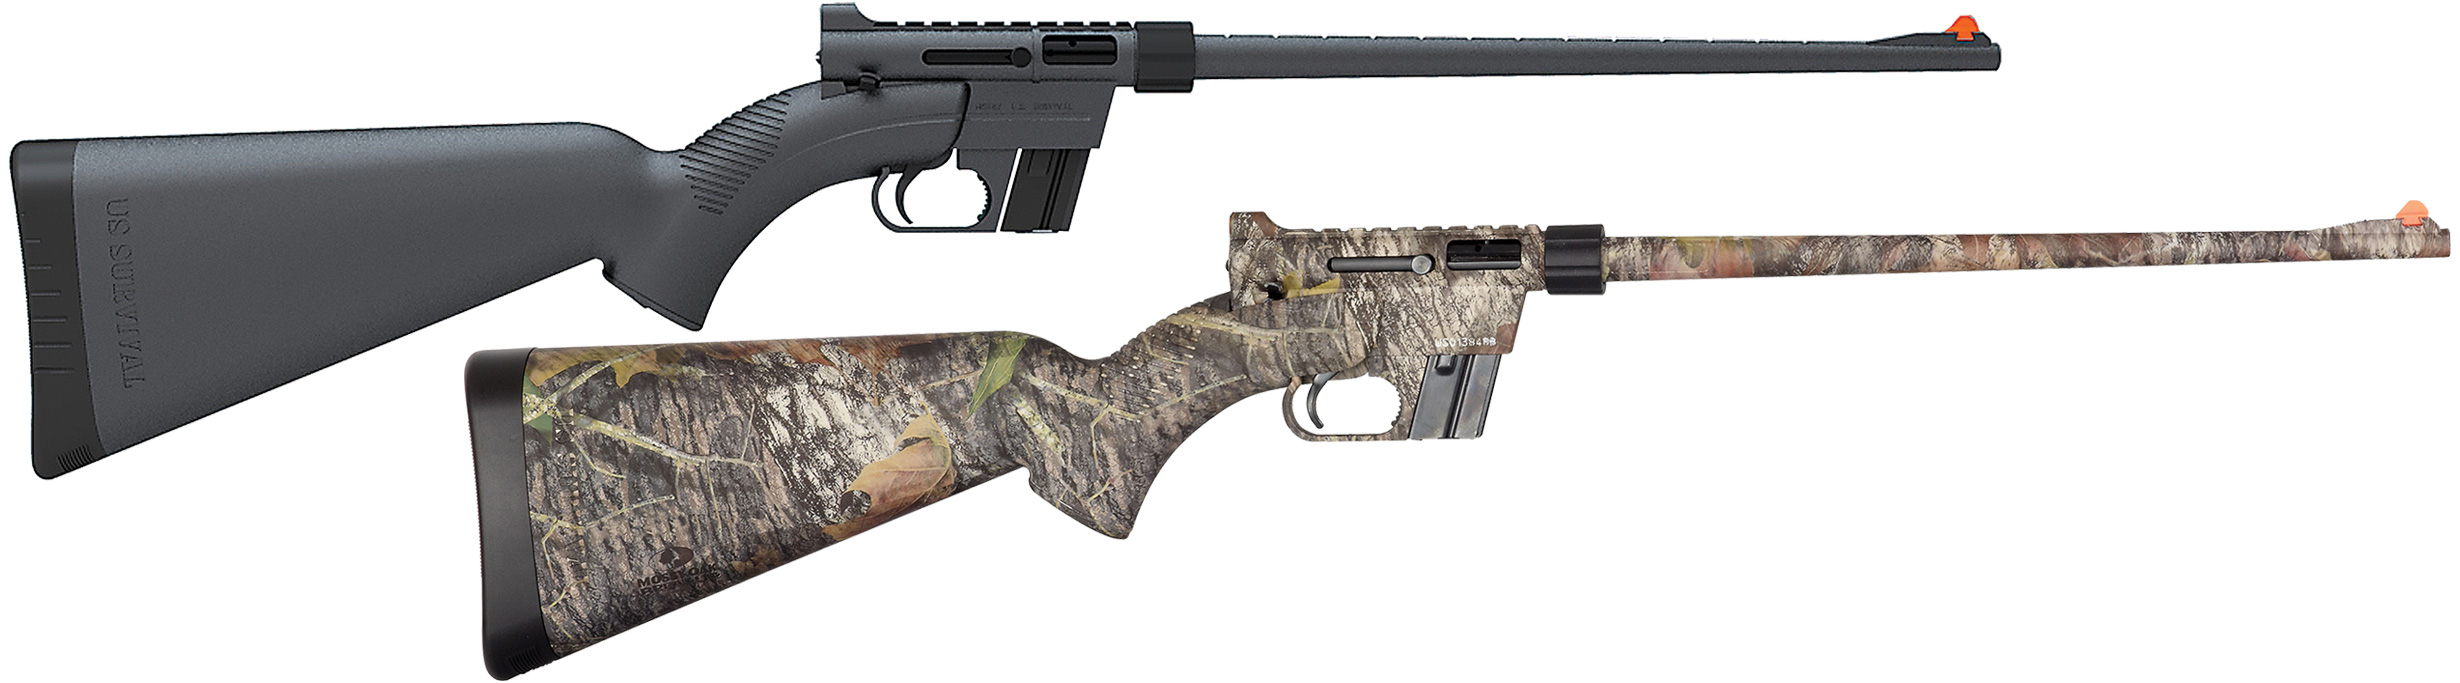 Sootch00 Review: The All-Weather Lever-Action Rifles from Henry